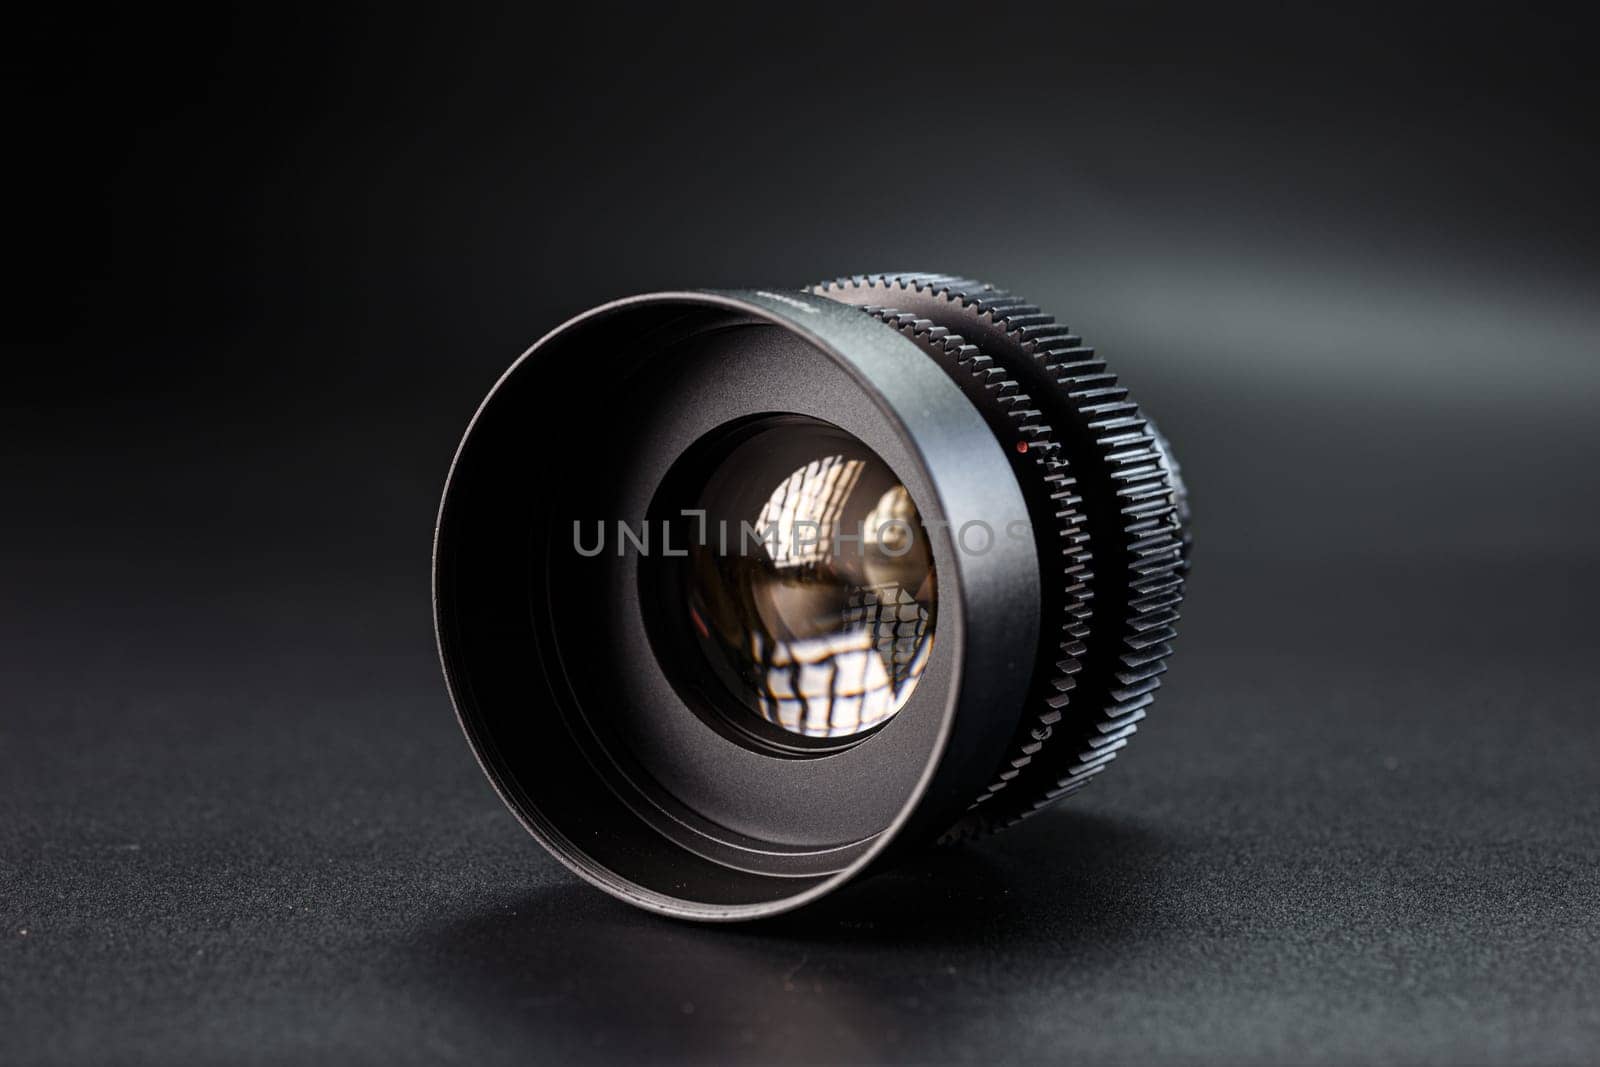 Close-up view of vintage Helios camera lens, black finish, photography gear on dark background, detailed focus rings visible, professional photographic equipment. by mosfet_ua